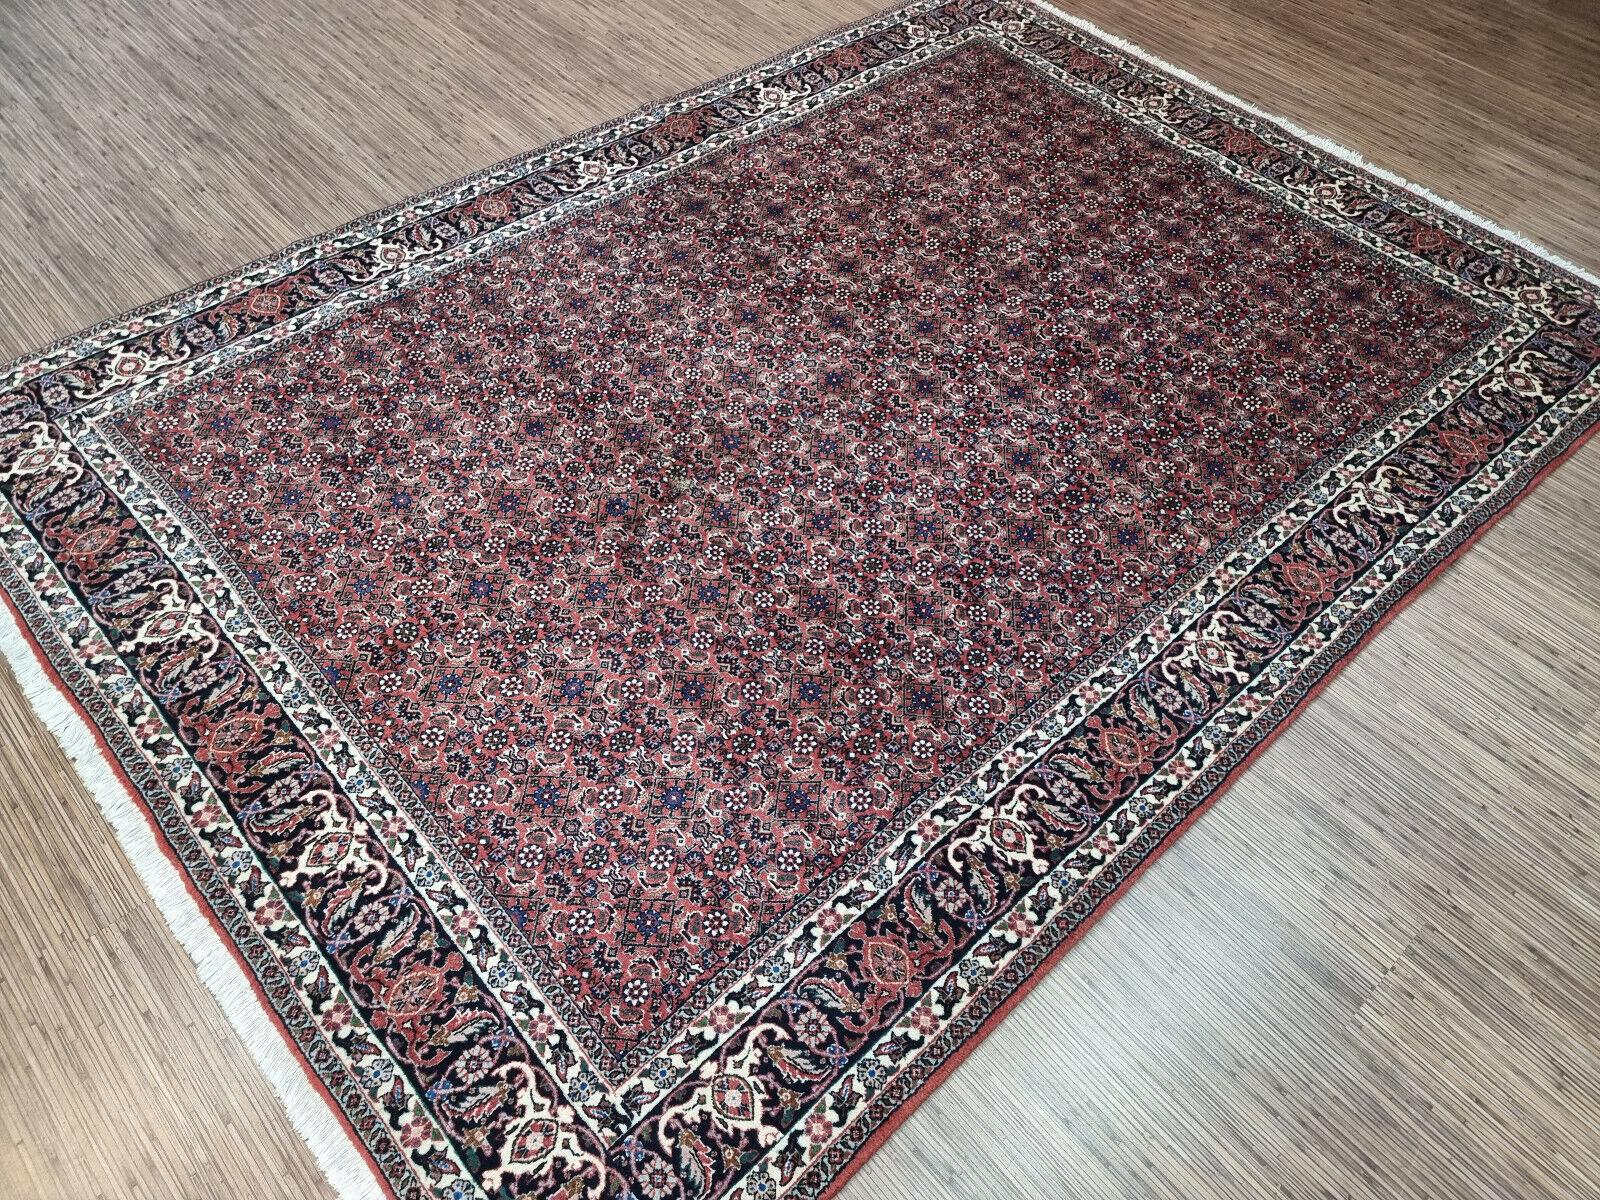 Handmade Vintage Persian Style Bidjar Rug 5.7' x 7.8', 1970s - 1D95 In Good Condition For Sale In Bordeaux, FR